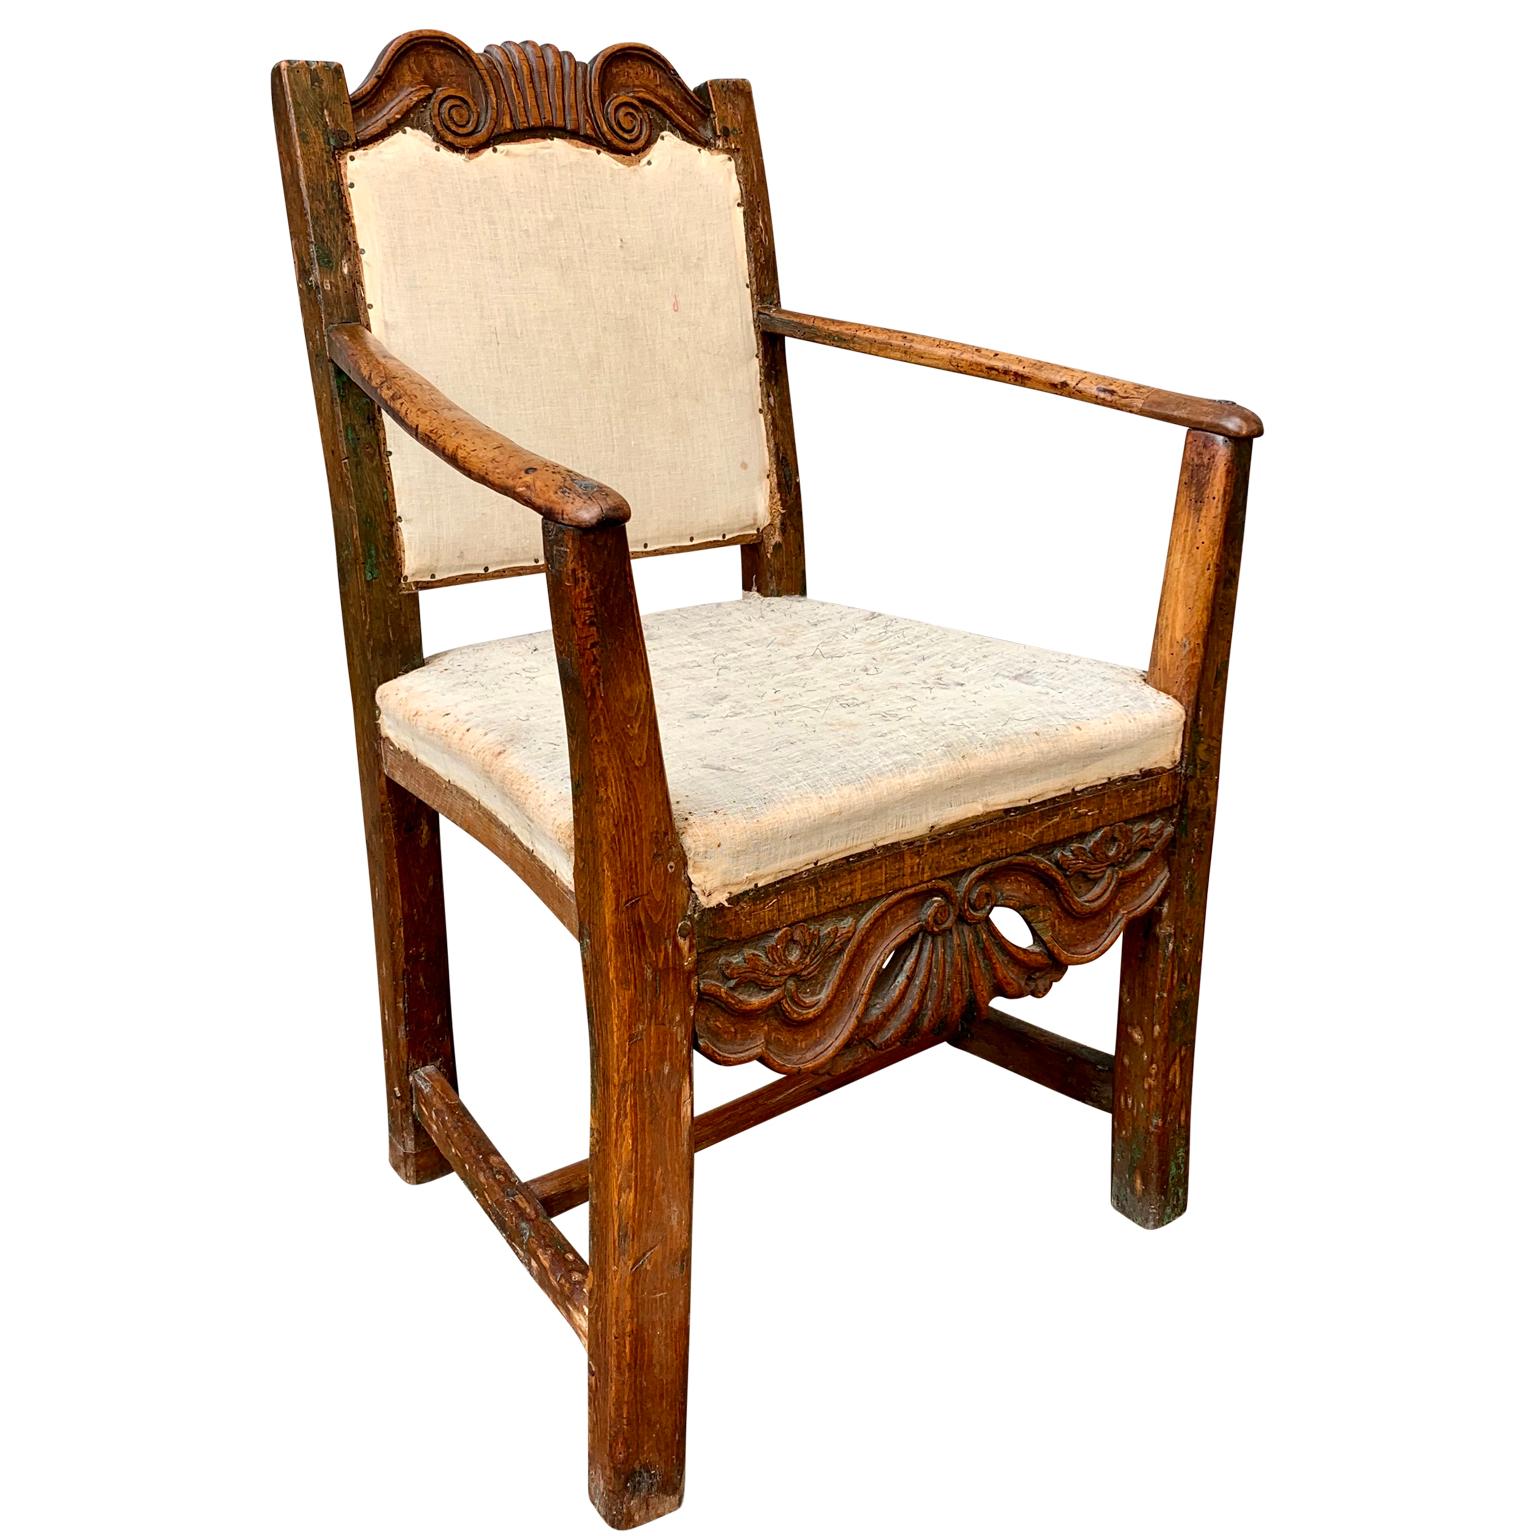 Hand-Carved Small Swedish 18th Century Primitive Rococo Folk Art Armchair For Sale